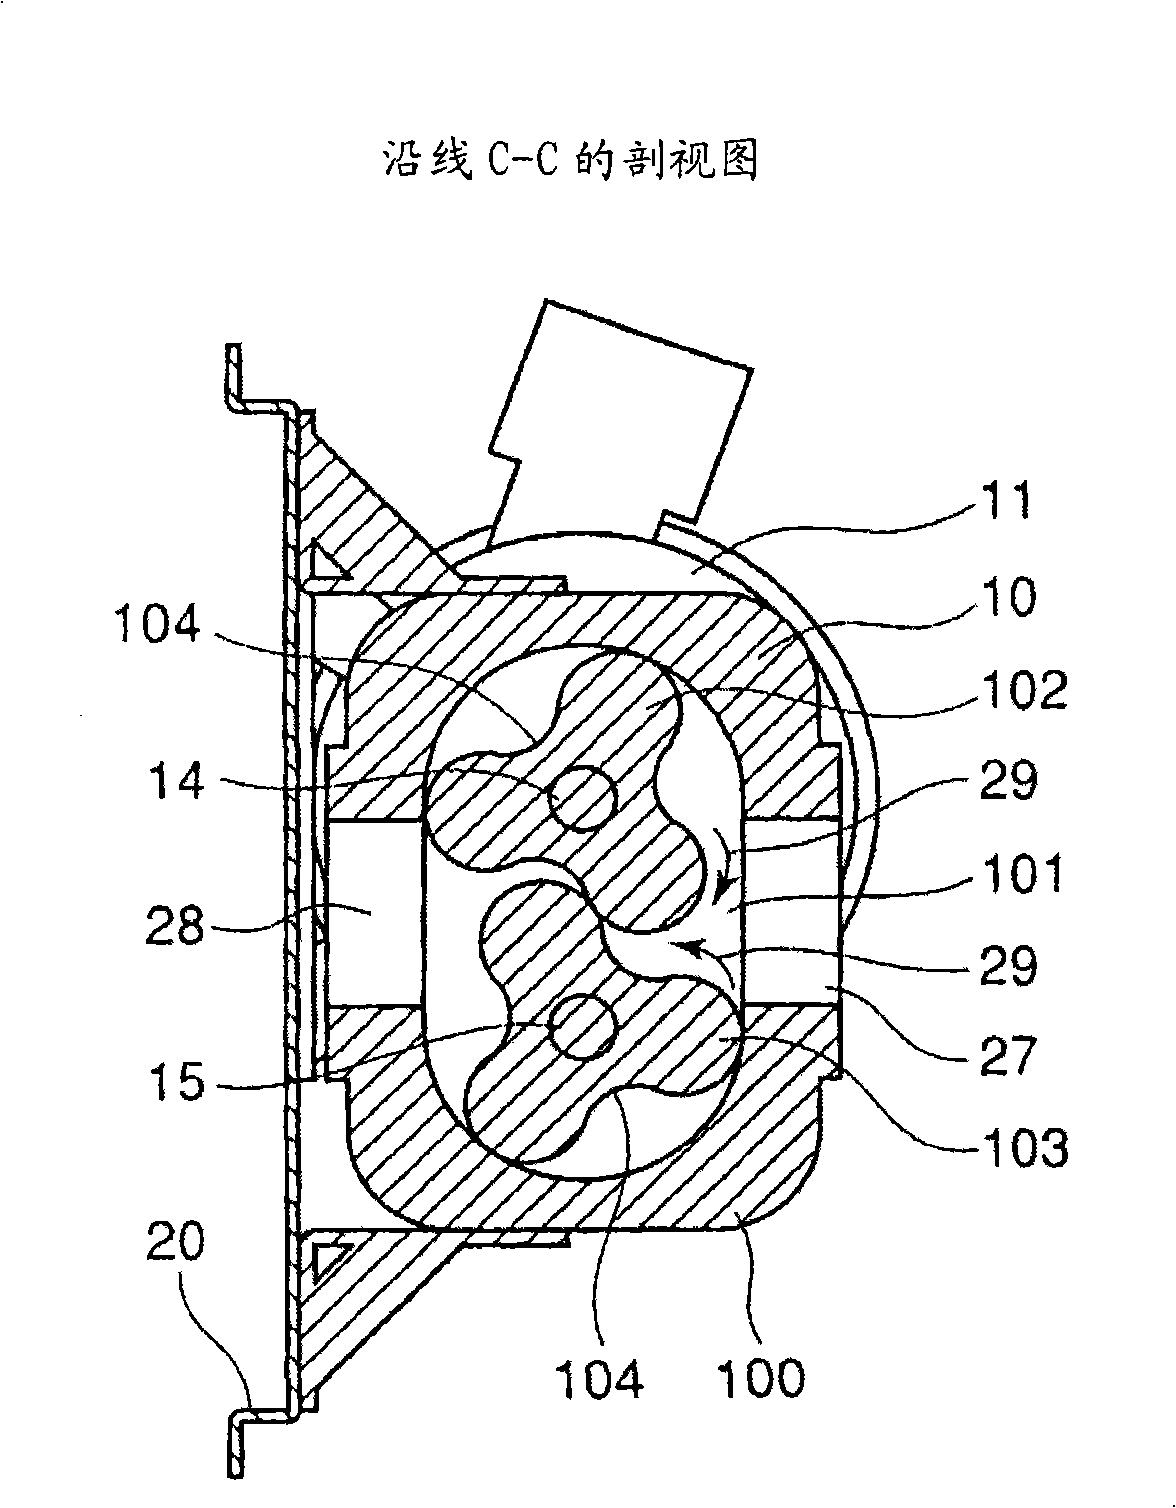 Oil-free fluid machine having two or more rotors